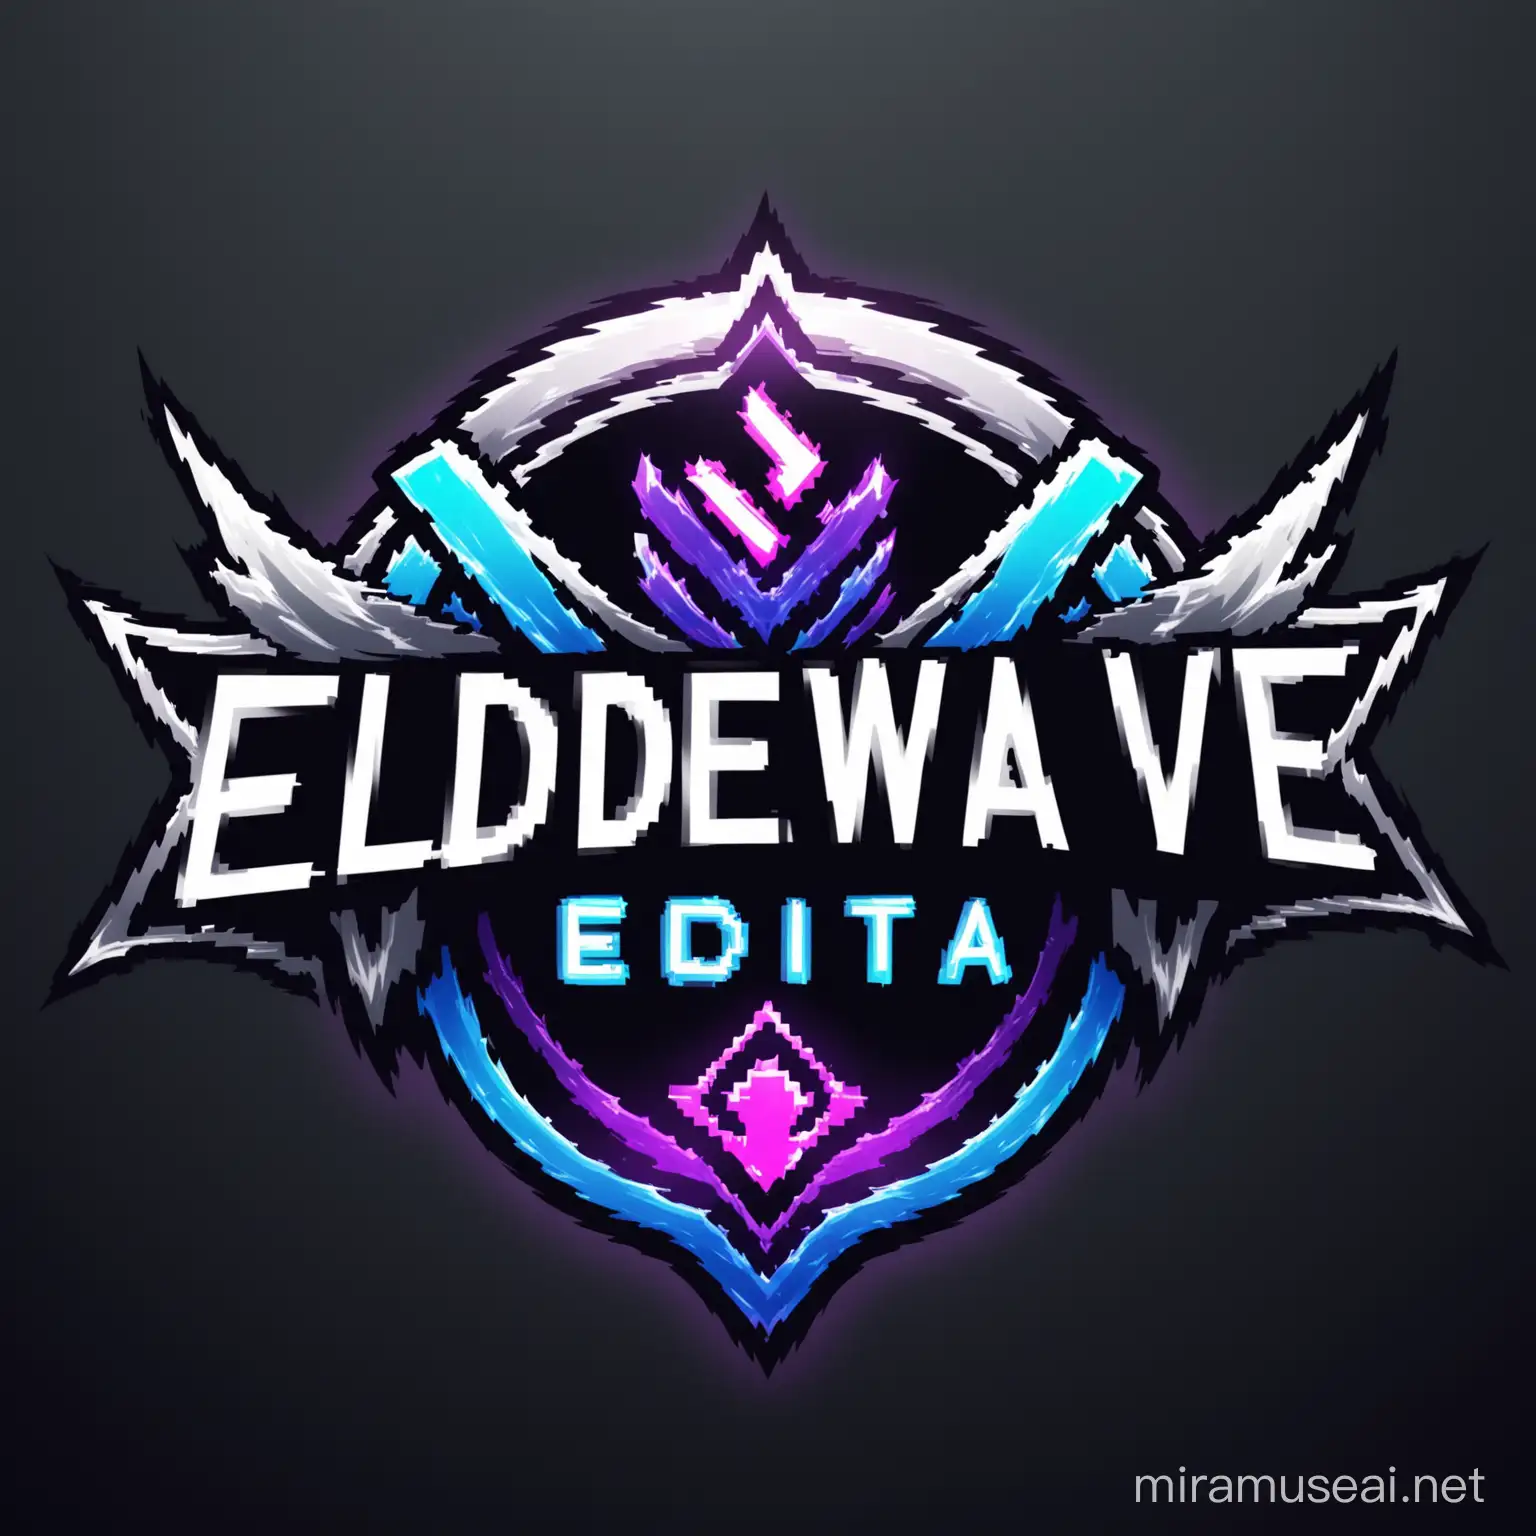 Dynamic Blade Wave Logo for YouTube Channel